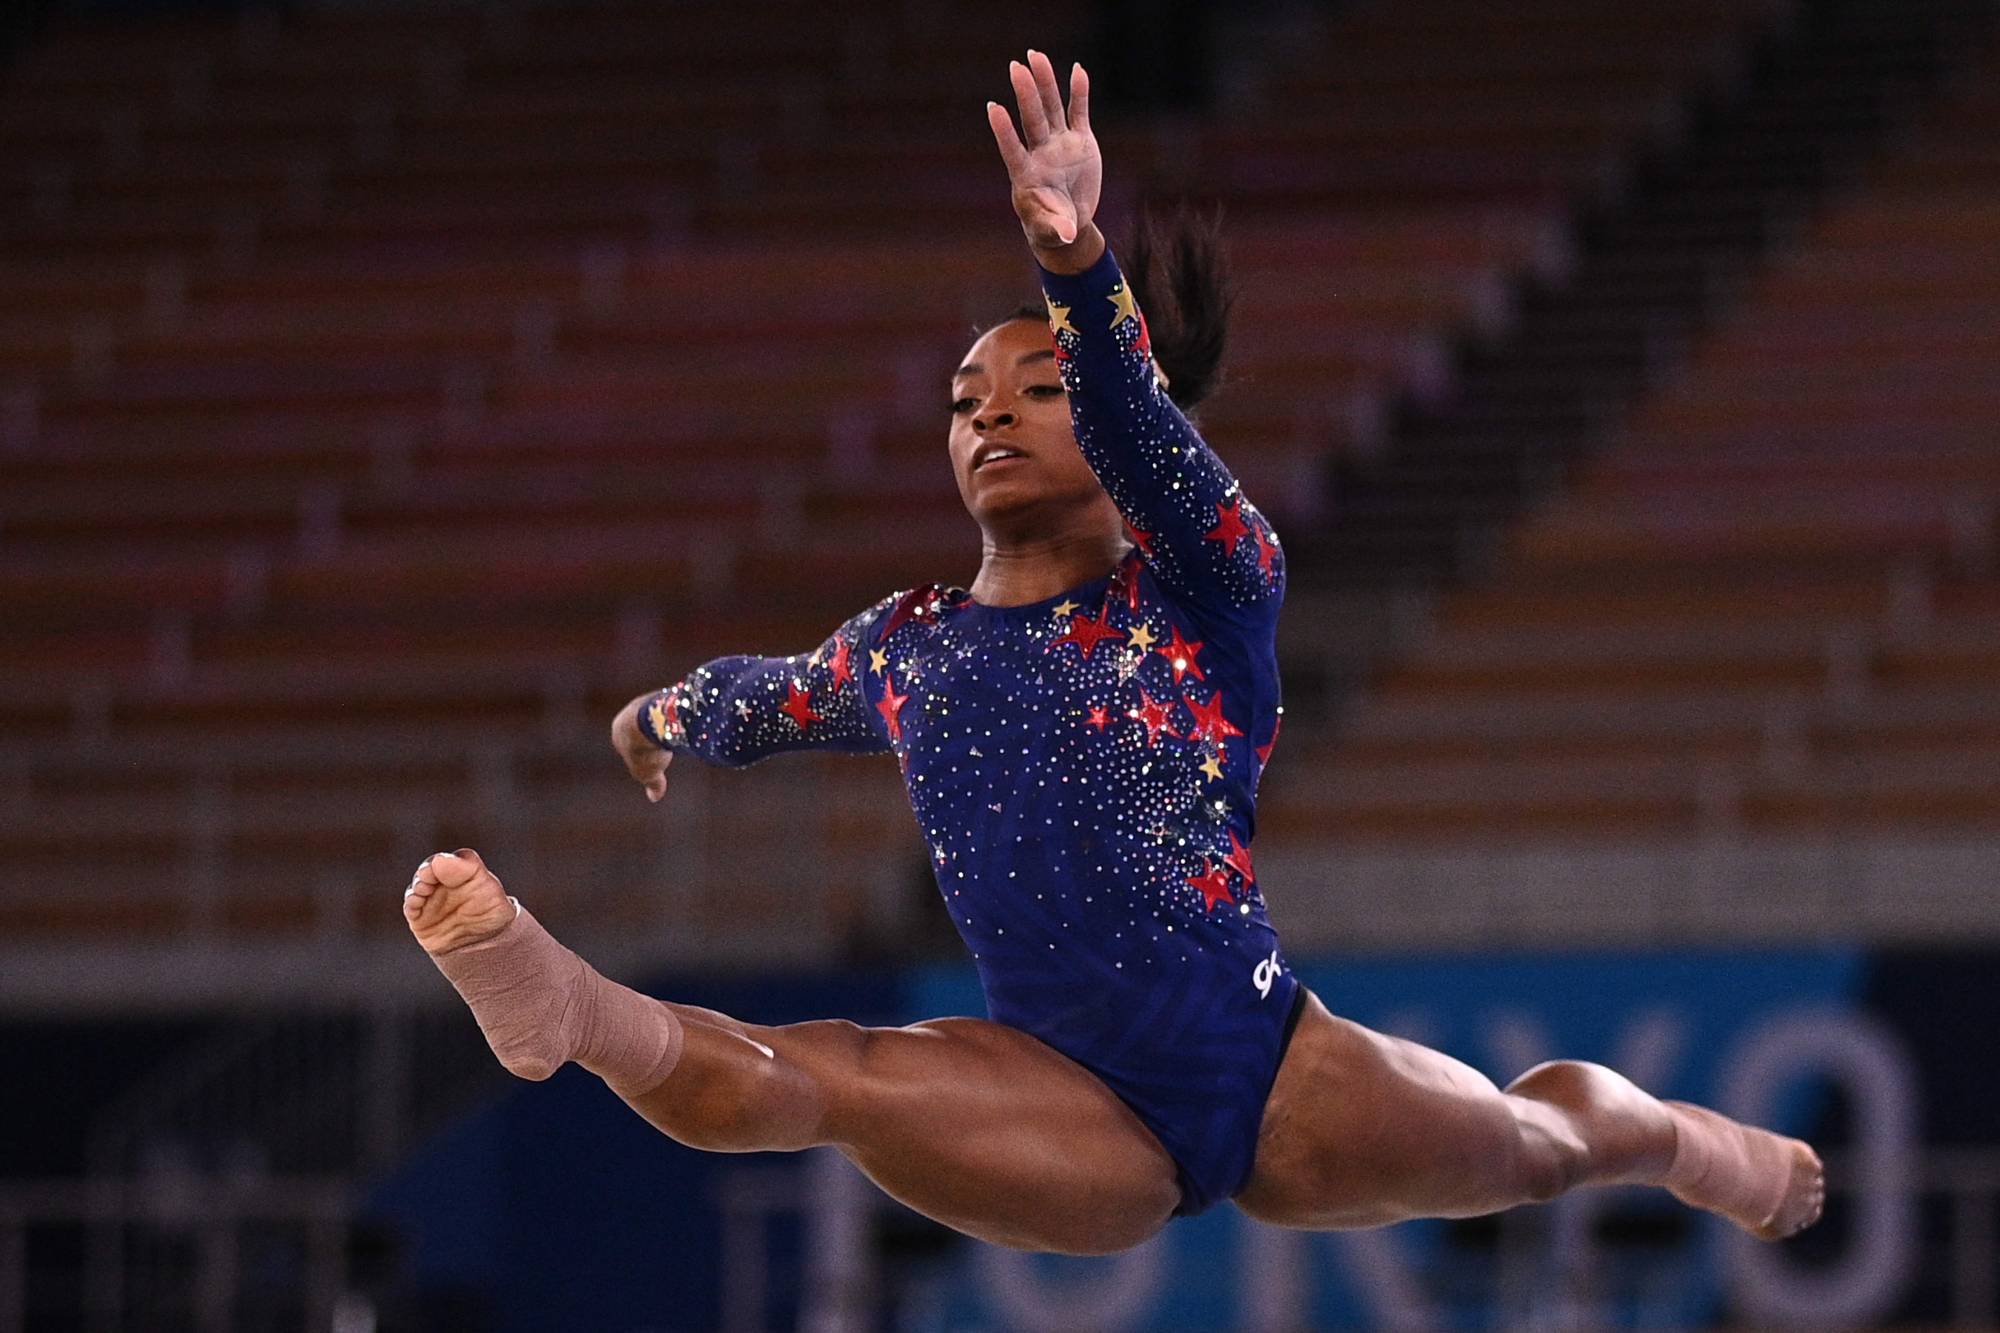 Simone Biles withdraws from Olympic floor exercise final - The Japan Times